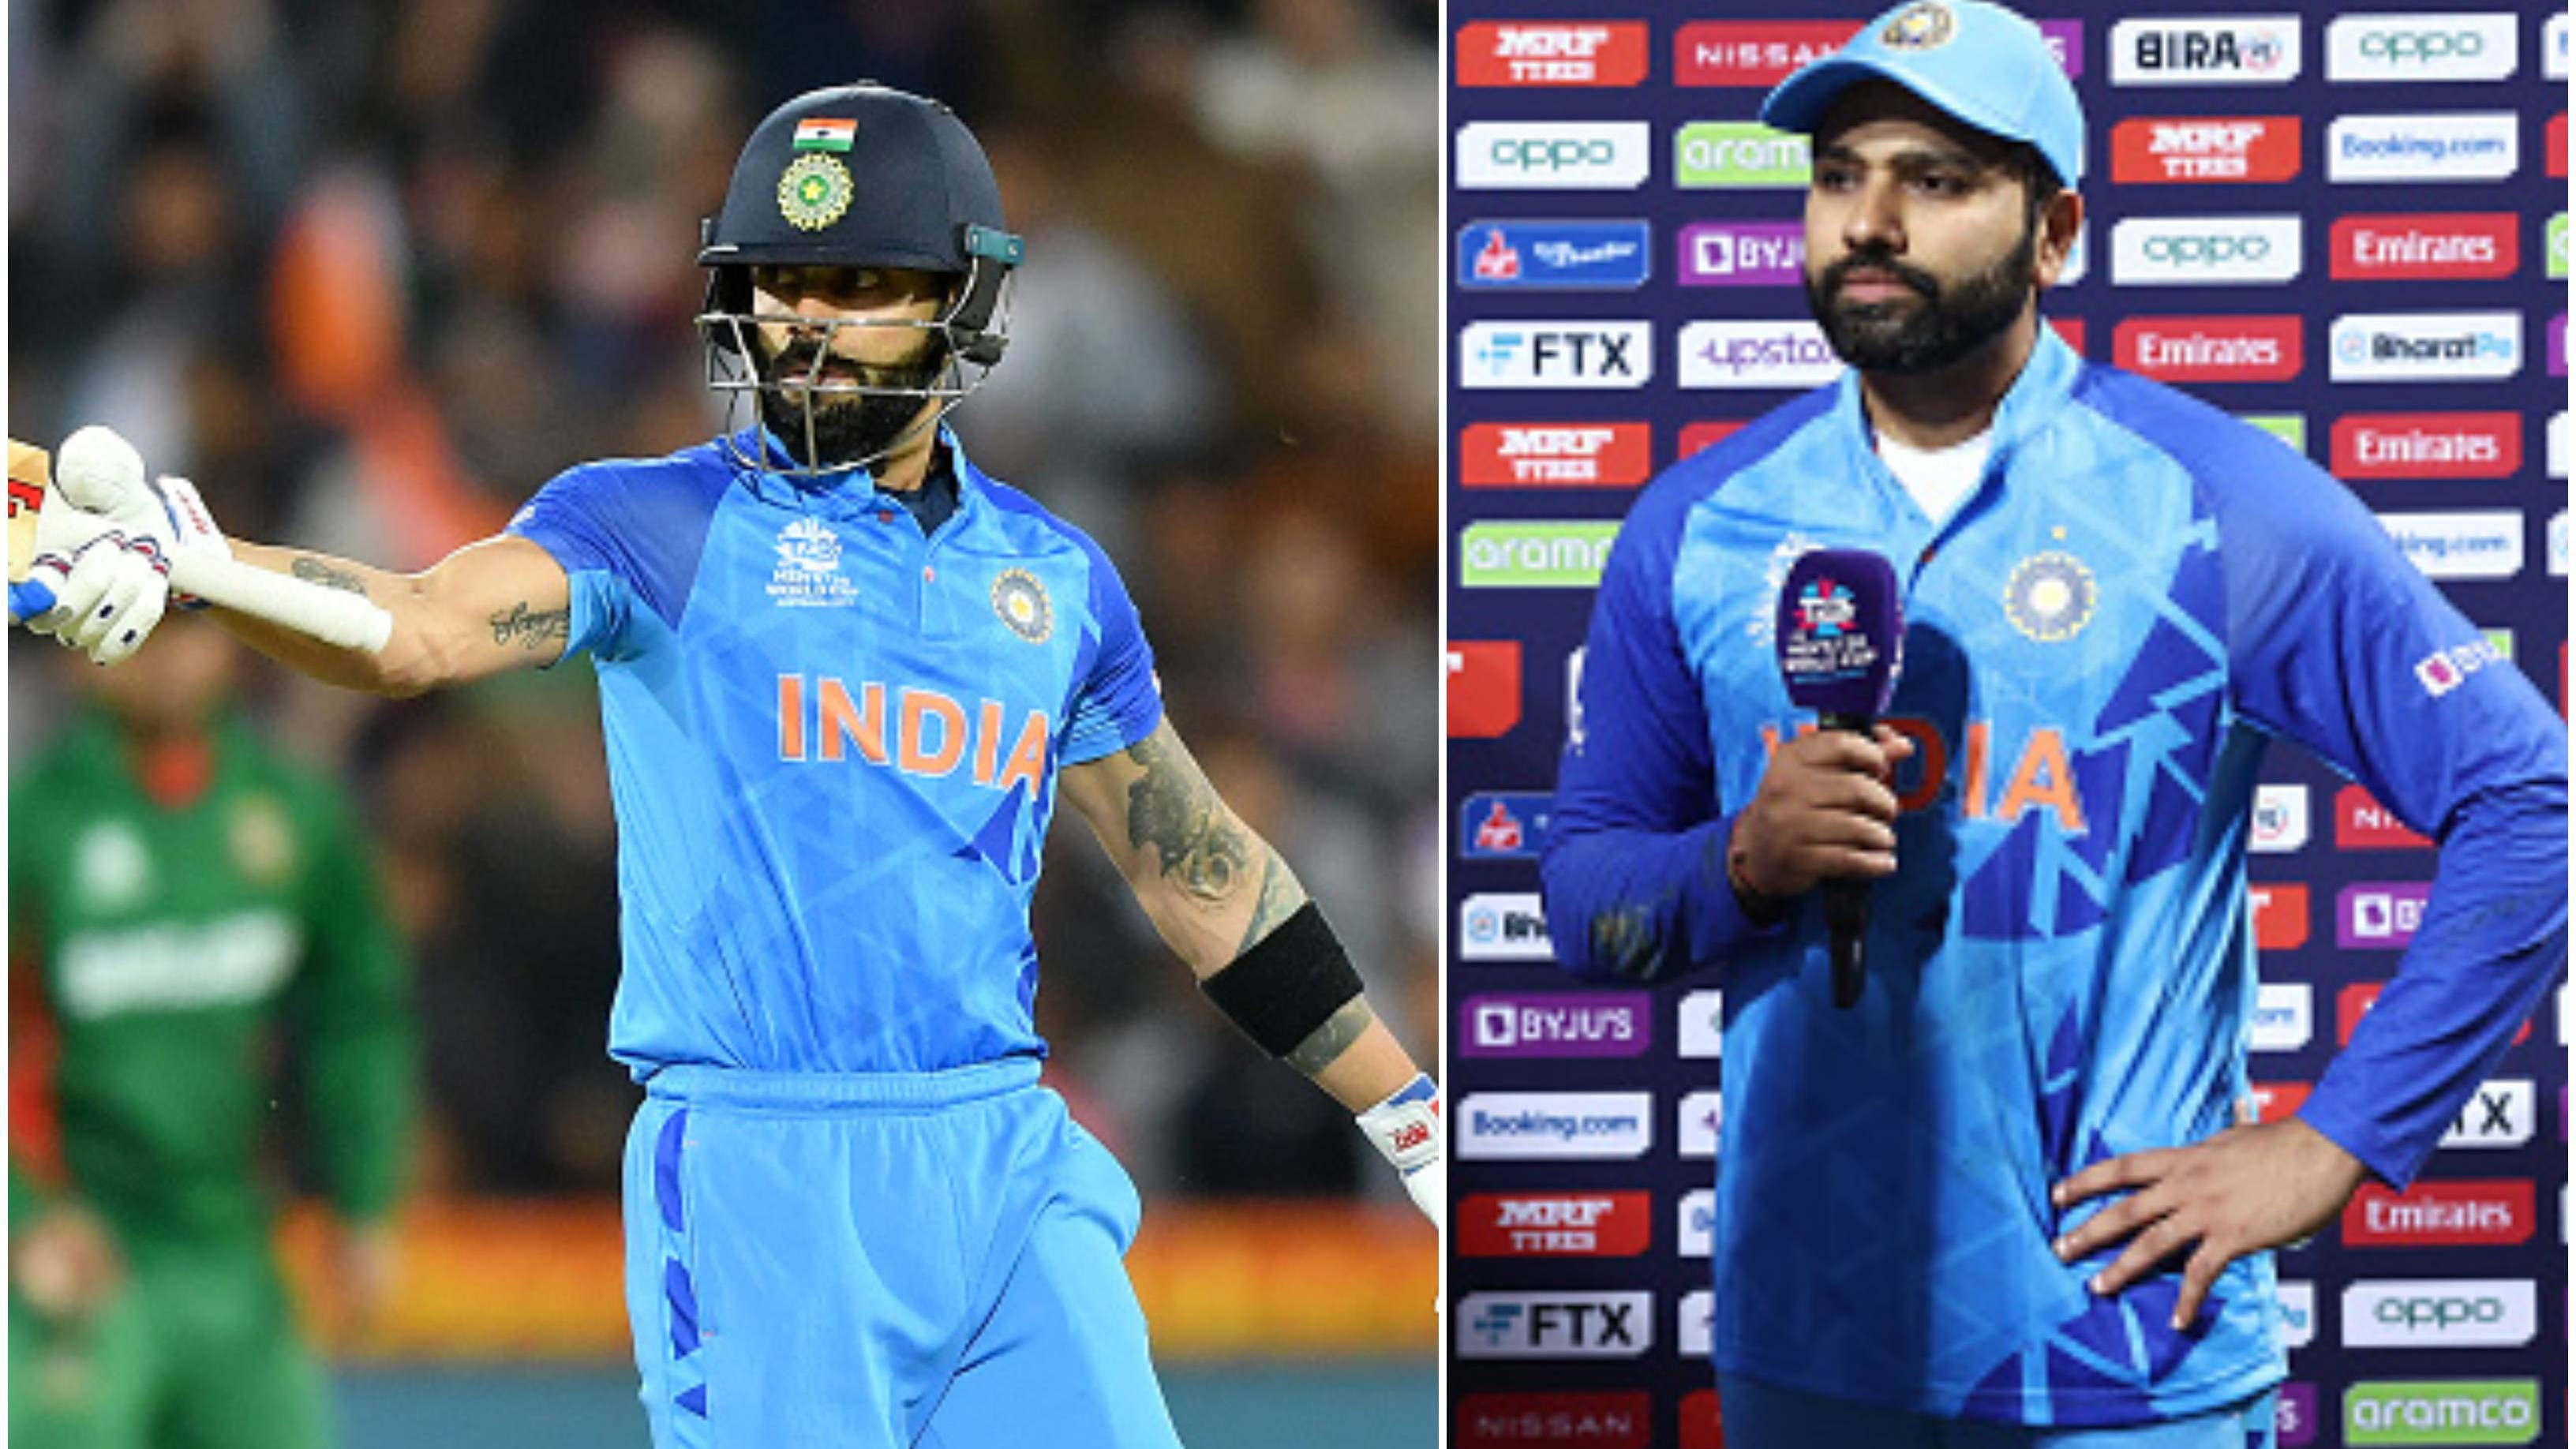 T20 World Cup 2022: “He is really doing it for us,” Rohit heaps praise on Kohli for his match-winning 64* vs Bangladesh